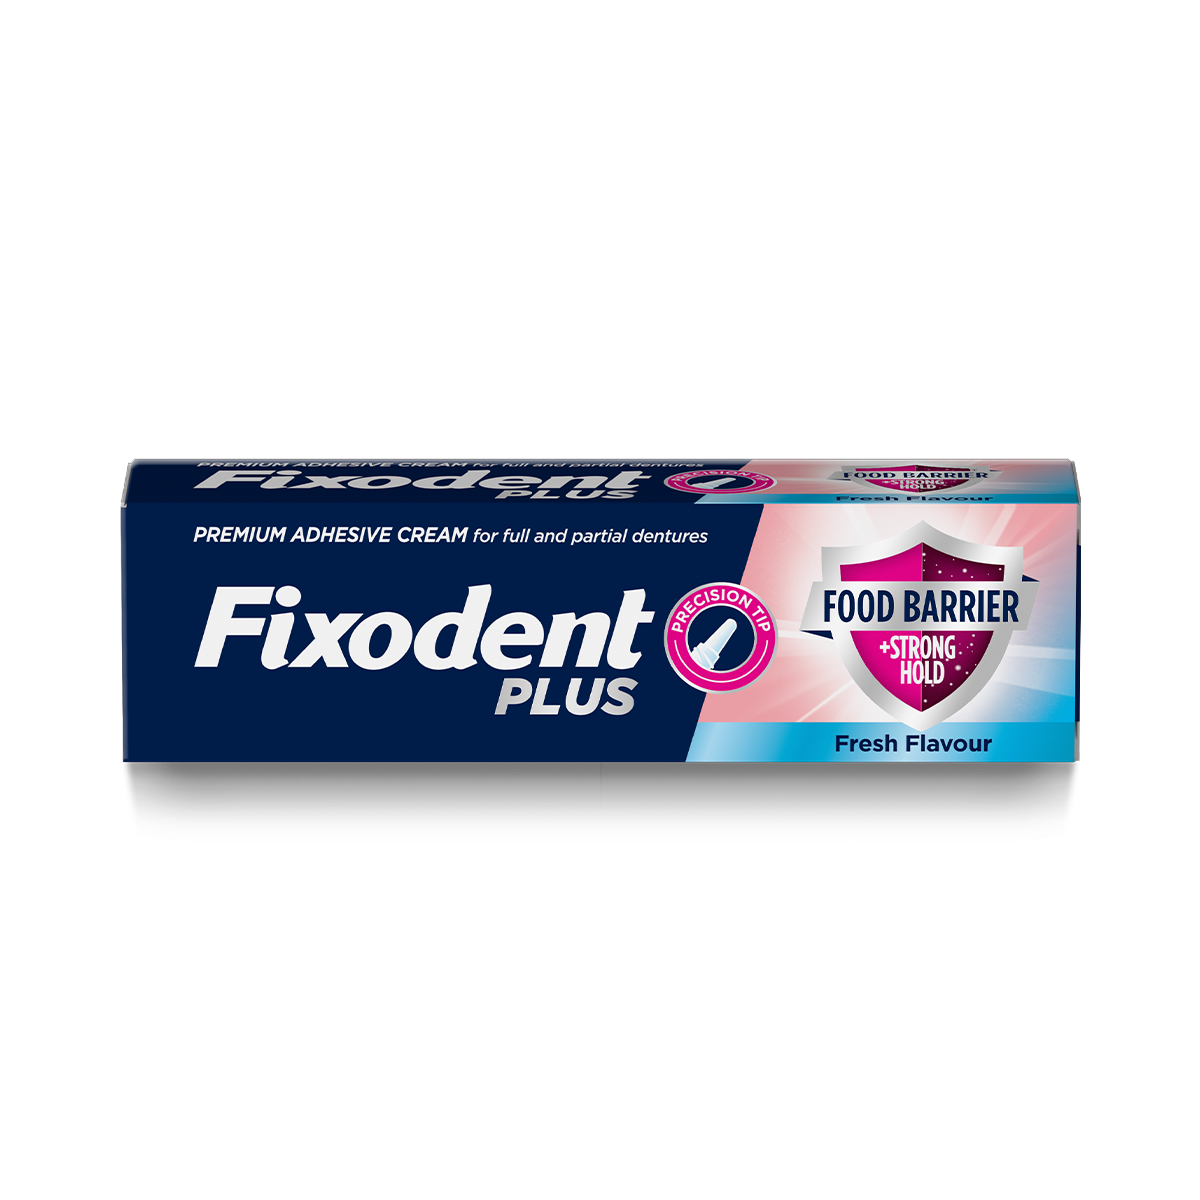 Fixodent Plus Dual Protection Denture Adhesive